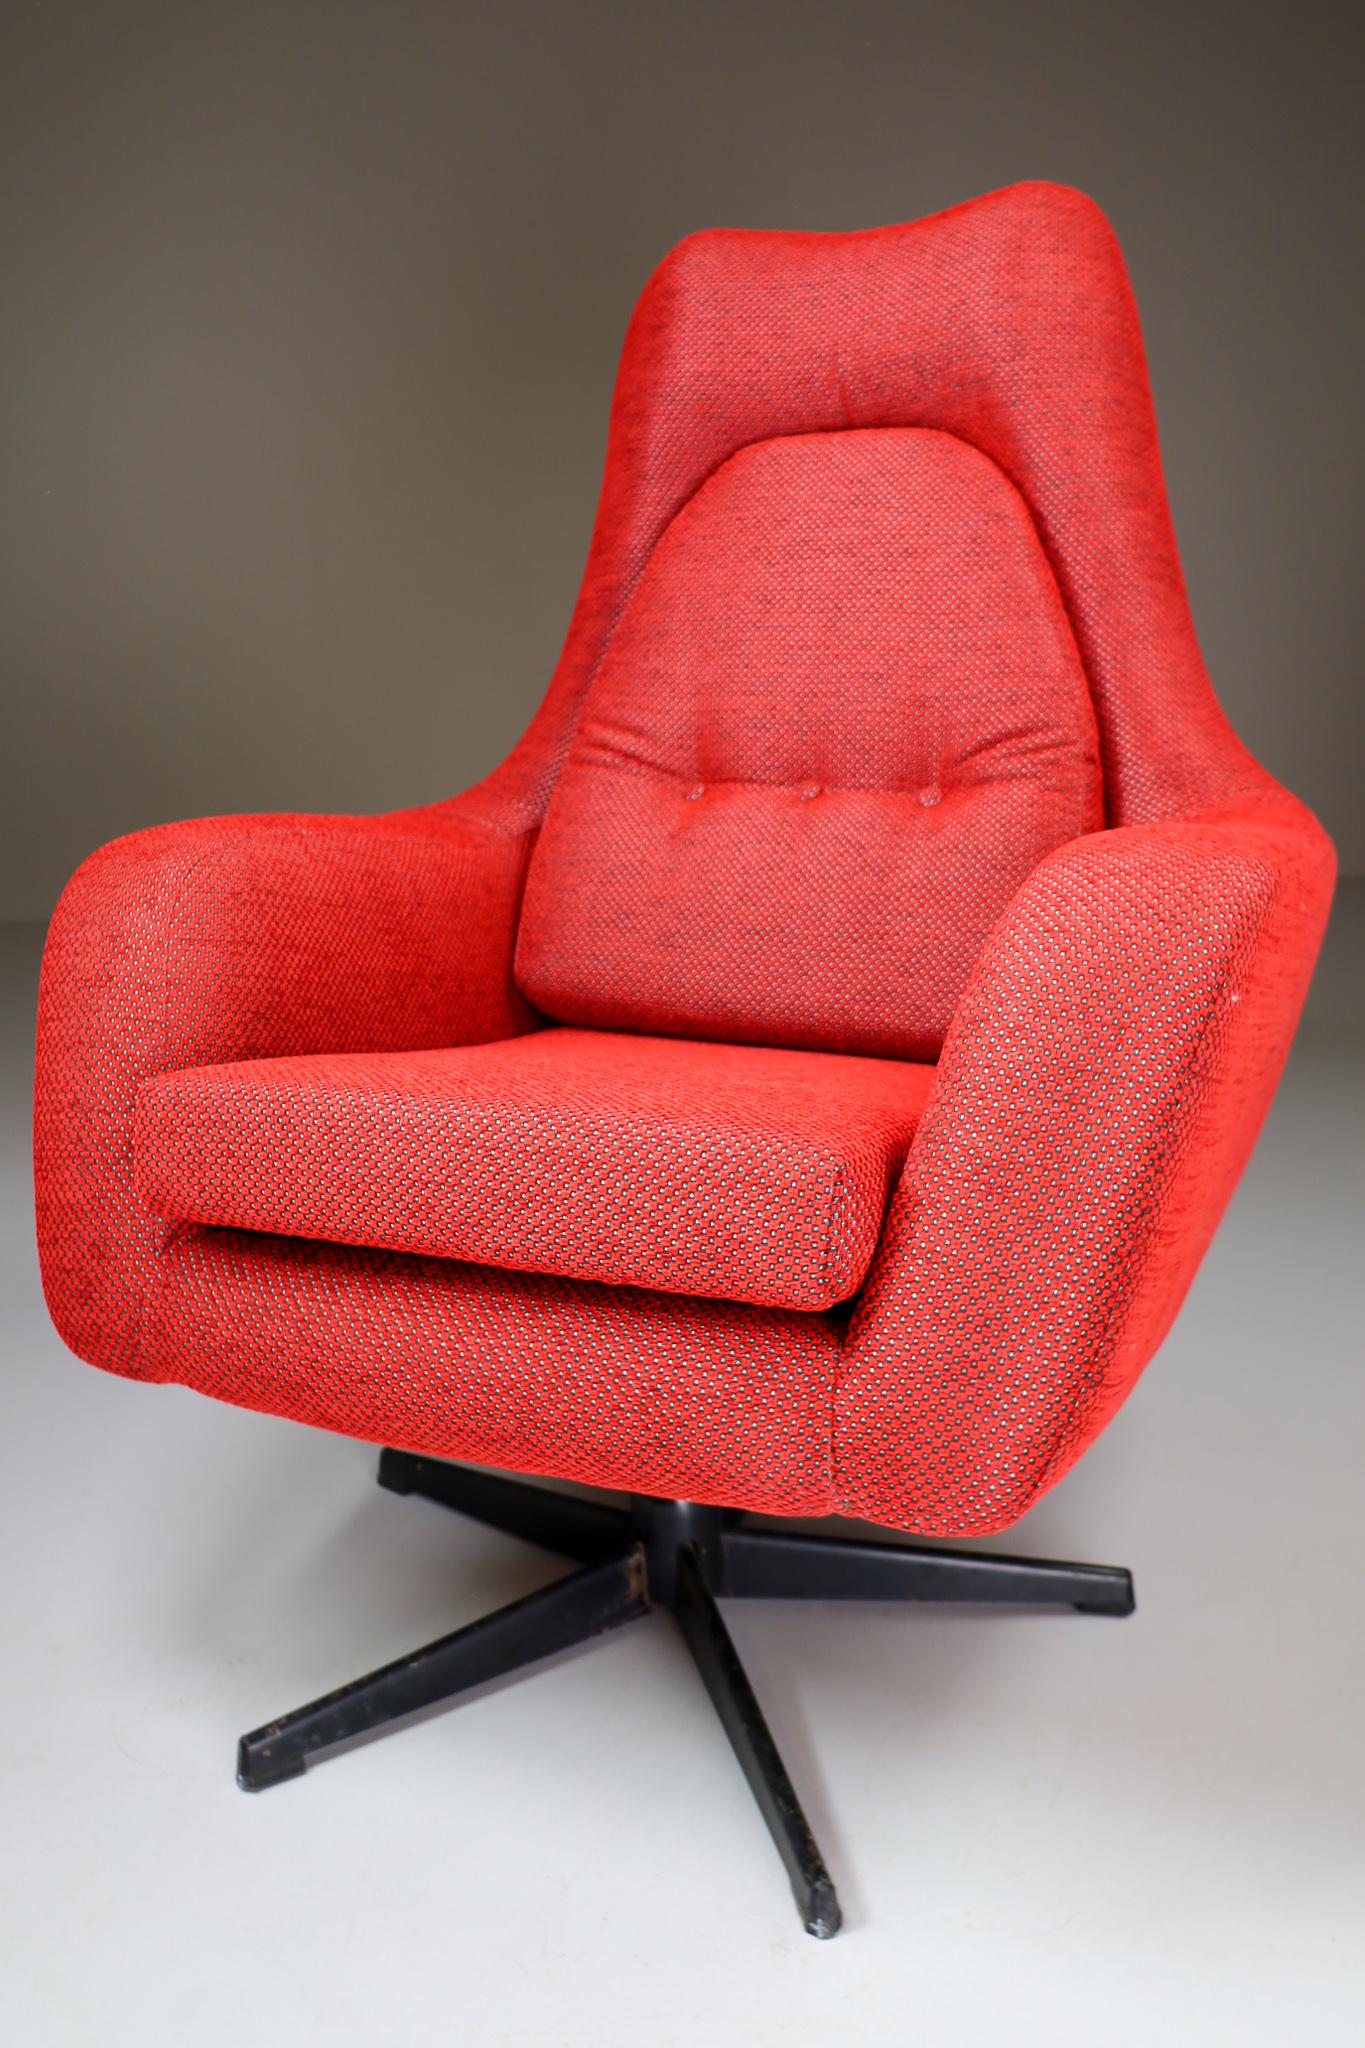 Pair of Swivel Chairs in New Reupholstered Red Fabric, Czech Republic 1970 For Sale 1